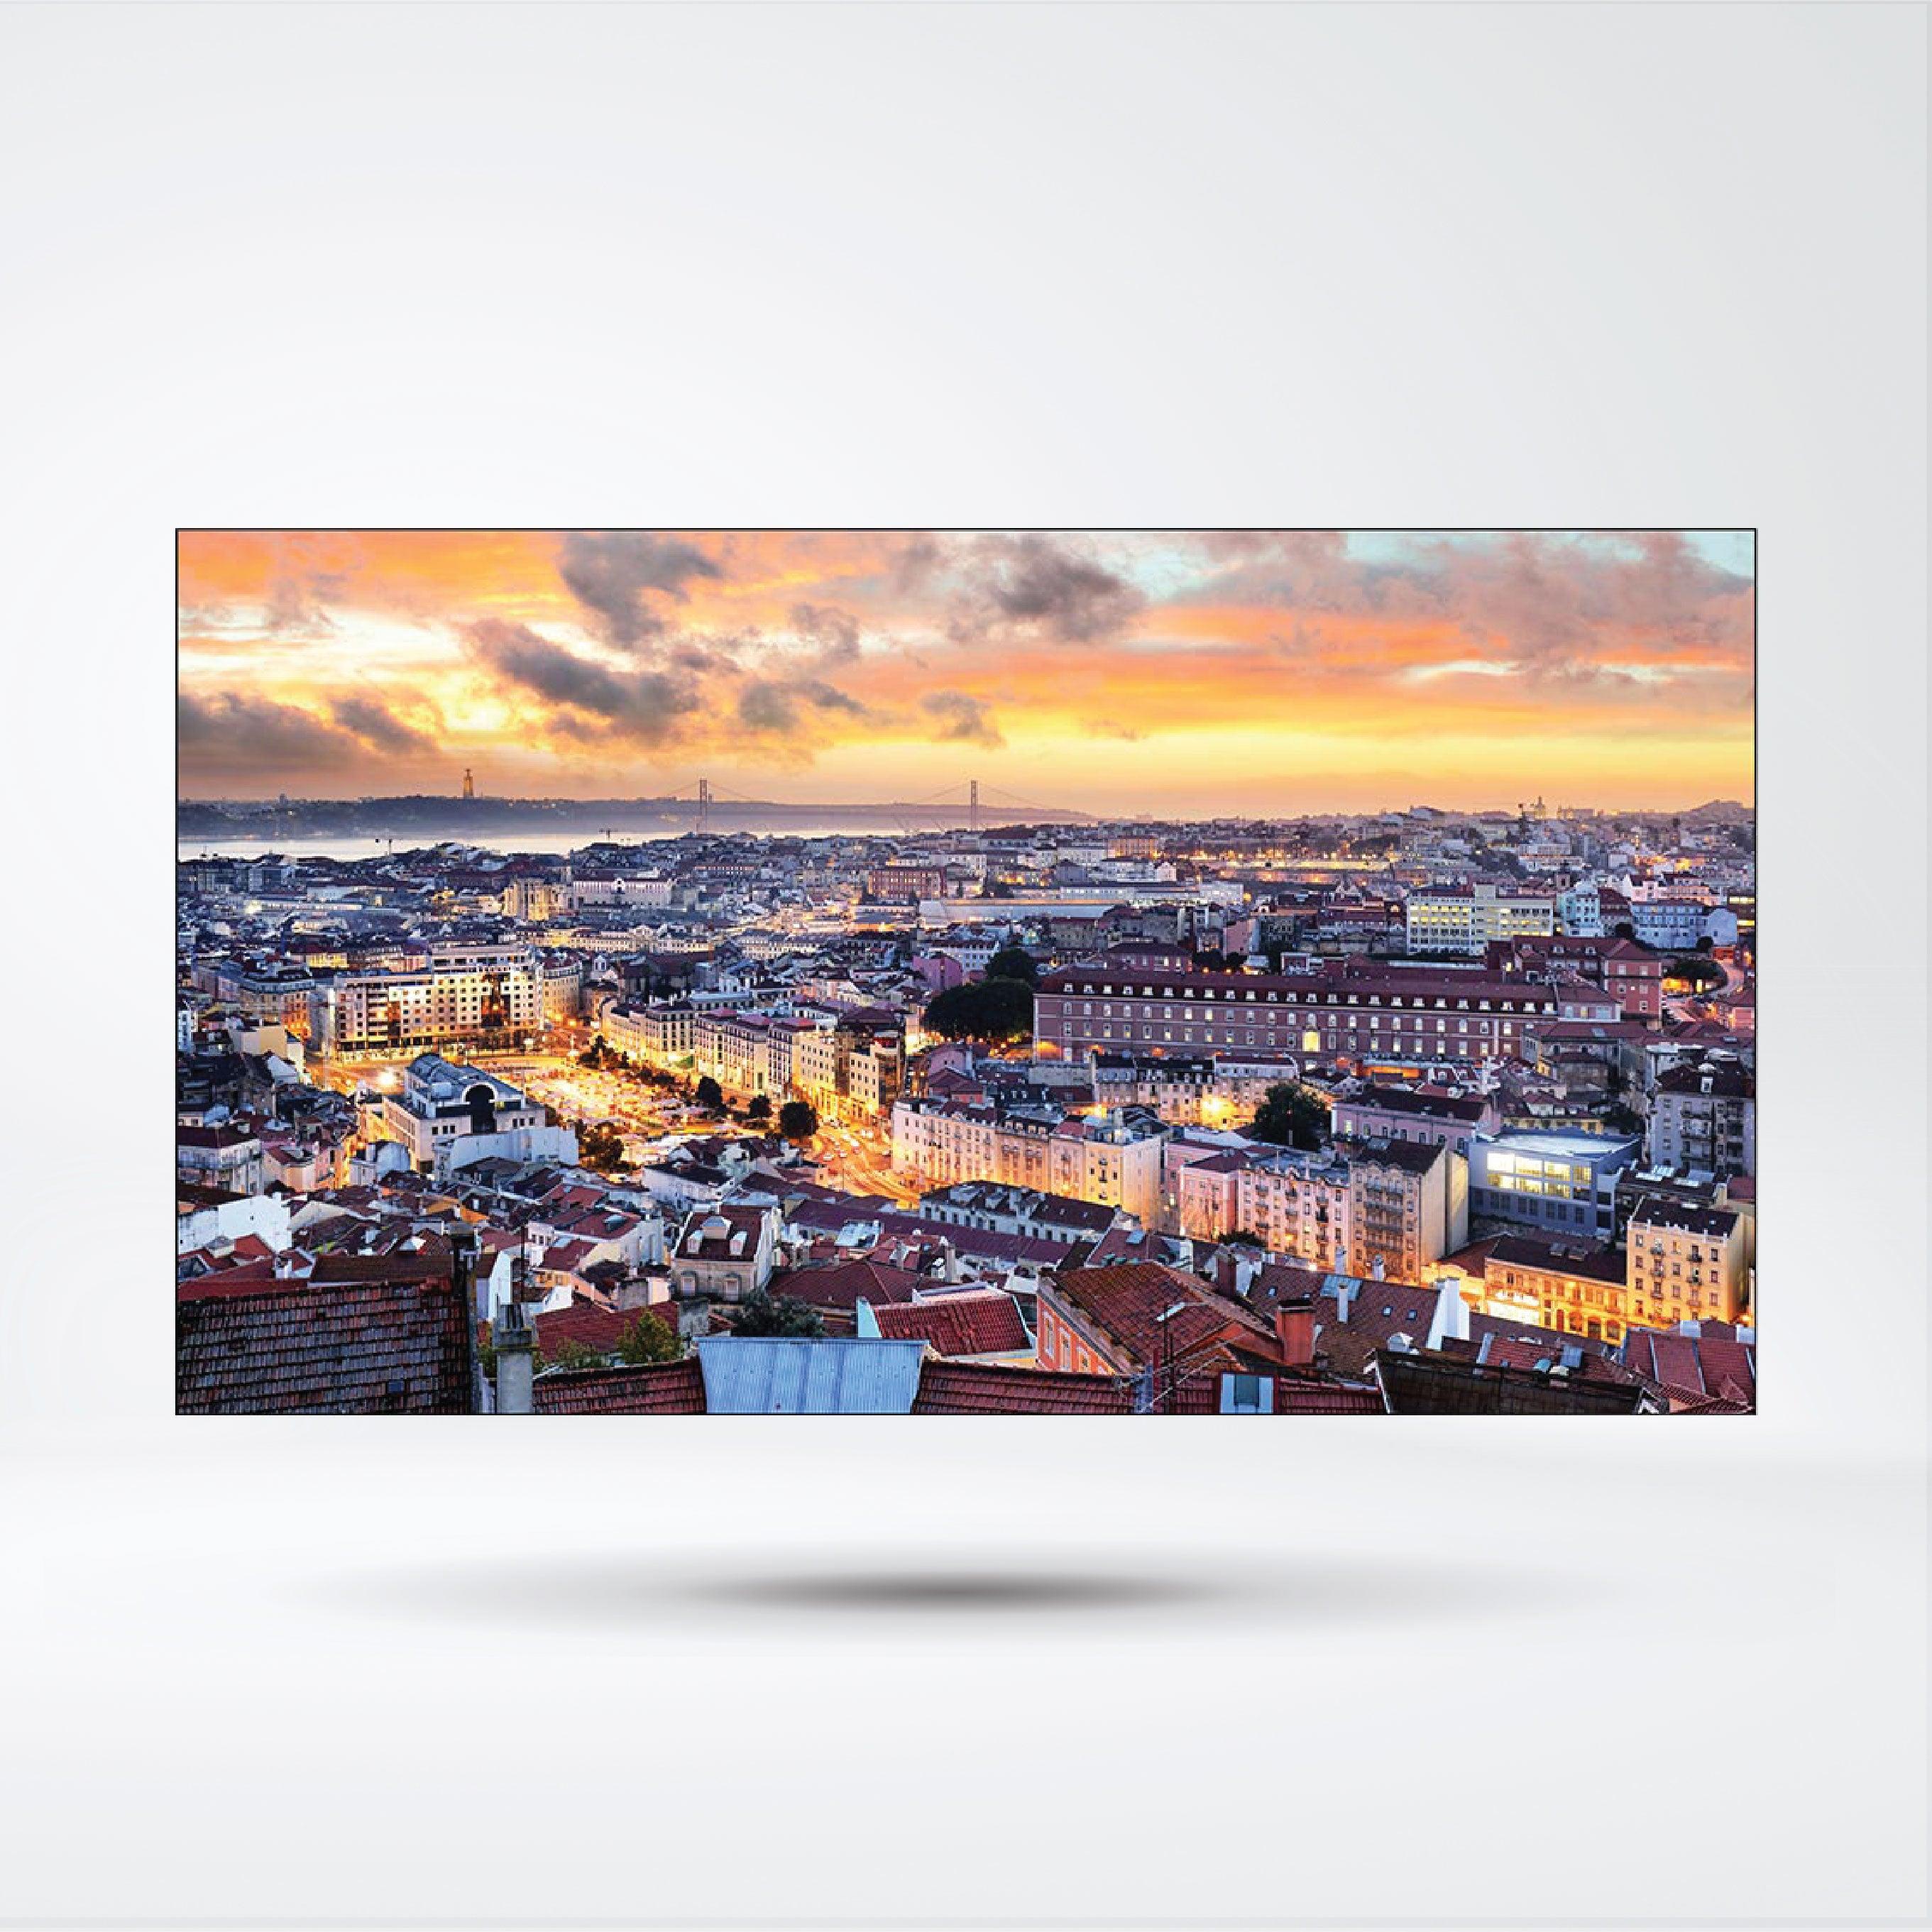 VH55B-E 55" 700nit Always-on, space-saving solution delivering a seamless visual experience - Riverplus